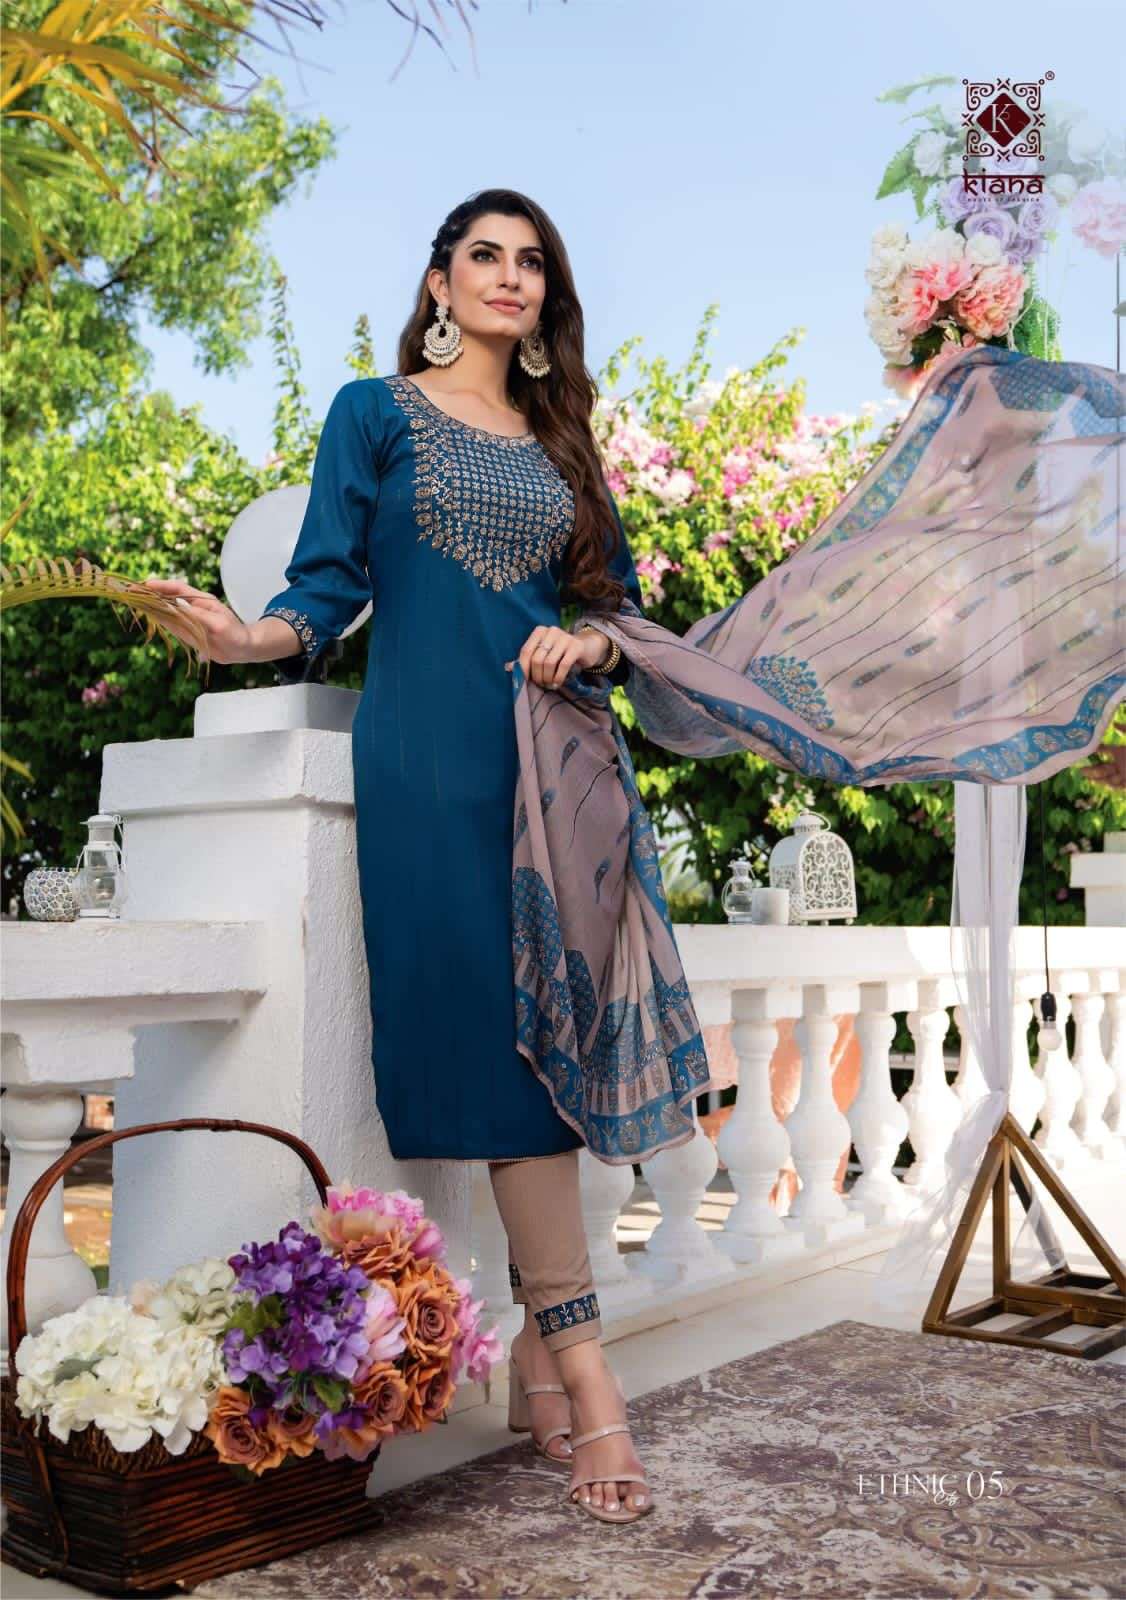 KIANA PRESENT ETHNIC CITY READYMADE PANT STYLE DESIGNER SUITS IN WHOLESALE RATE IN SURAT - SAI DRESSES